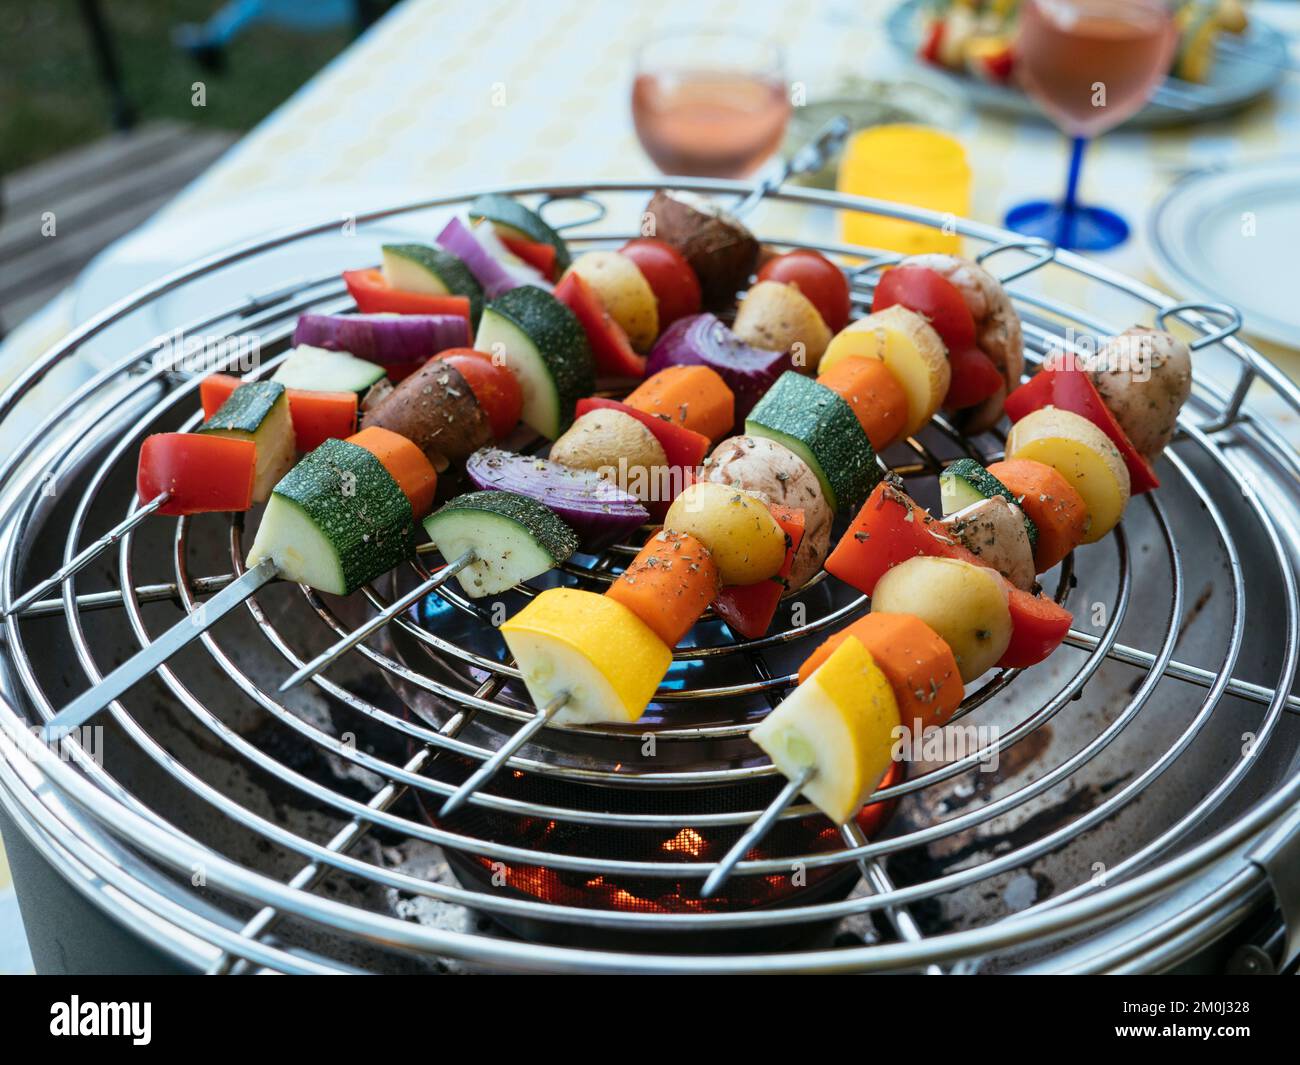 Skewers with mixed vegetables (zucchini, potato, carrot, bell pepper, mushroom) cooking on a charcoal grill Stock Photo